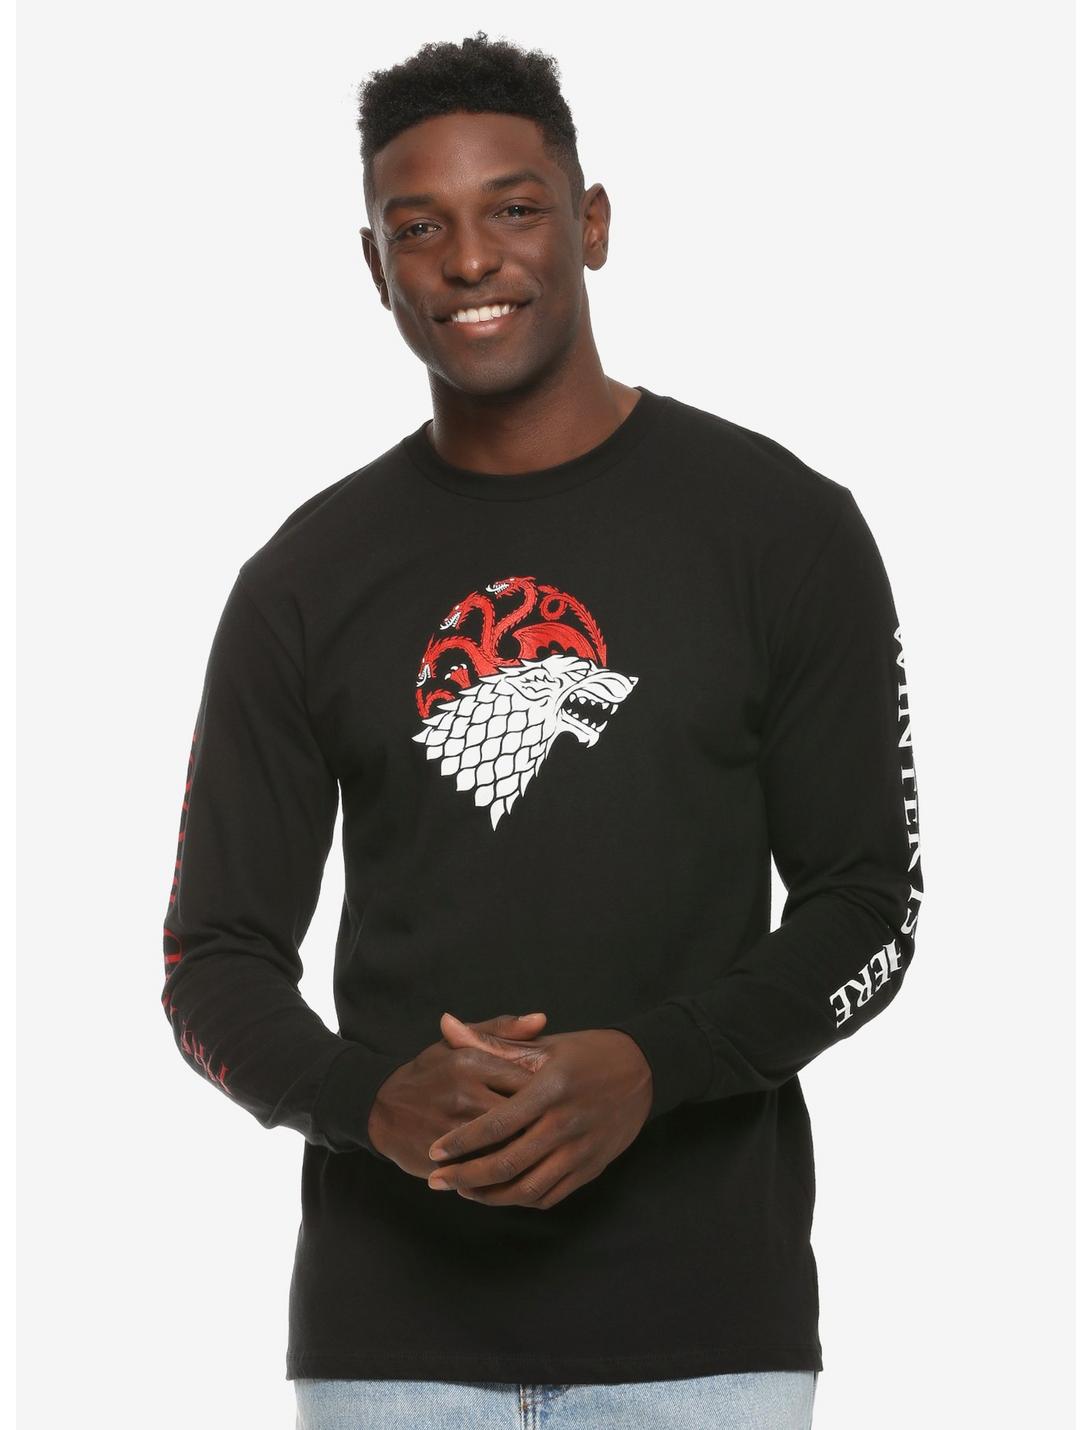 Game of Thrones Fire & Ice Long Sleeve T-Shirt, BLACK, hi-res